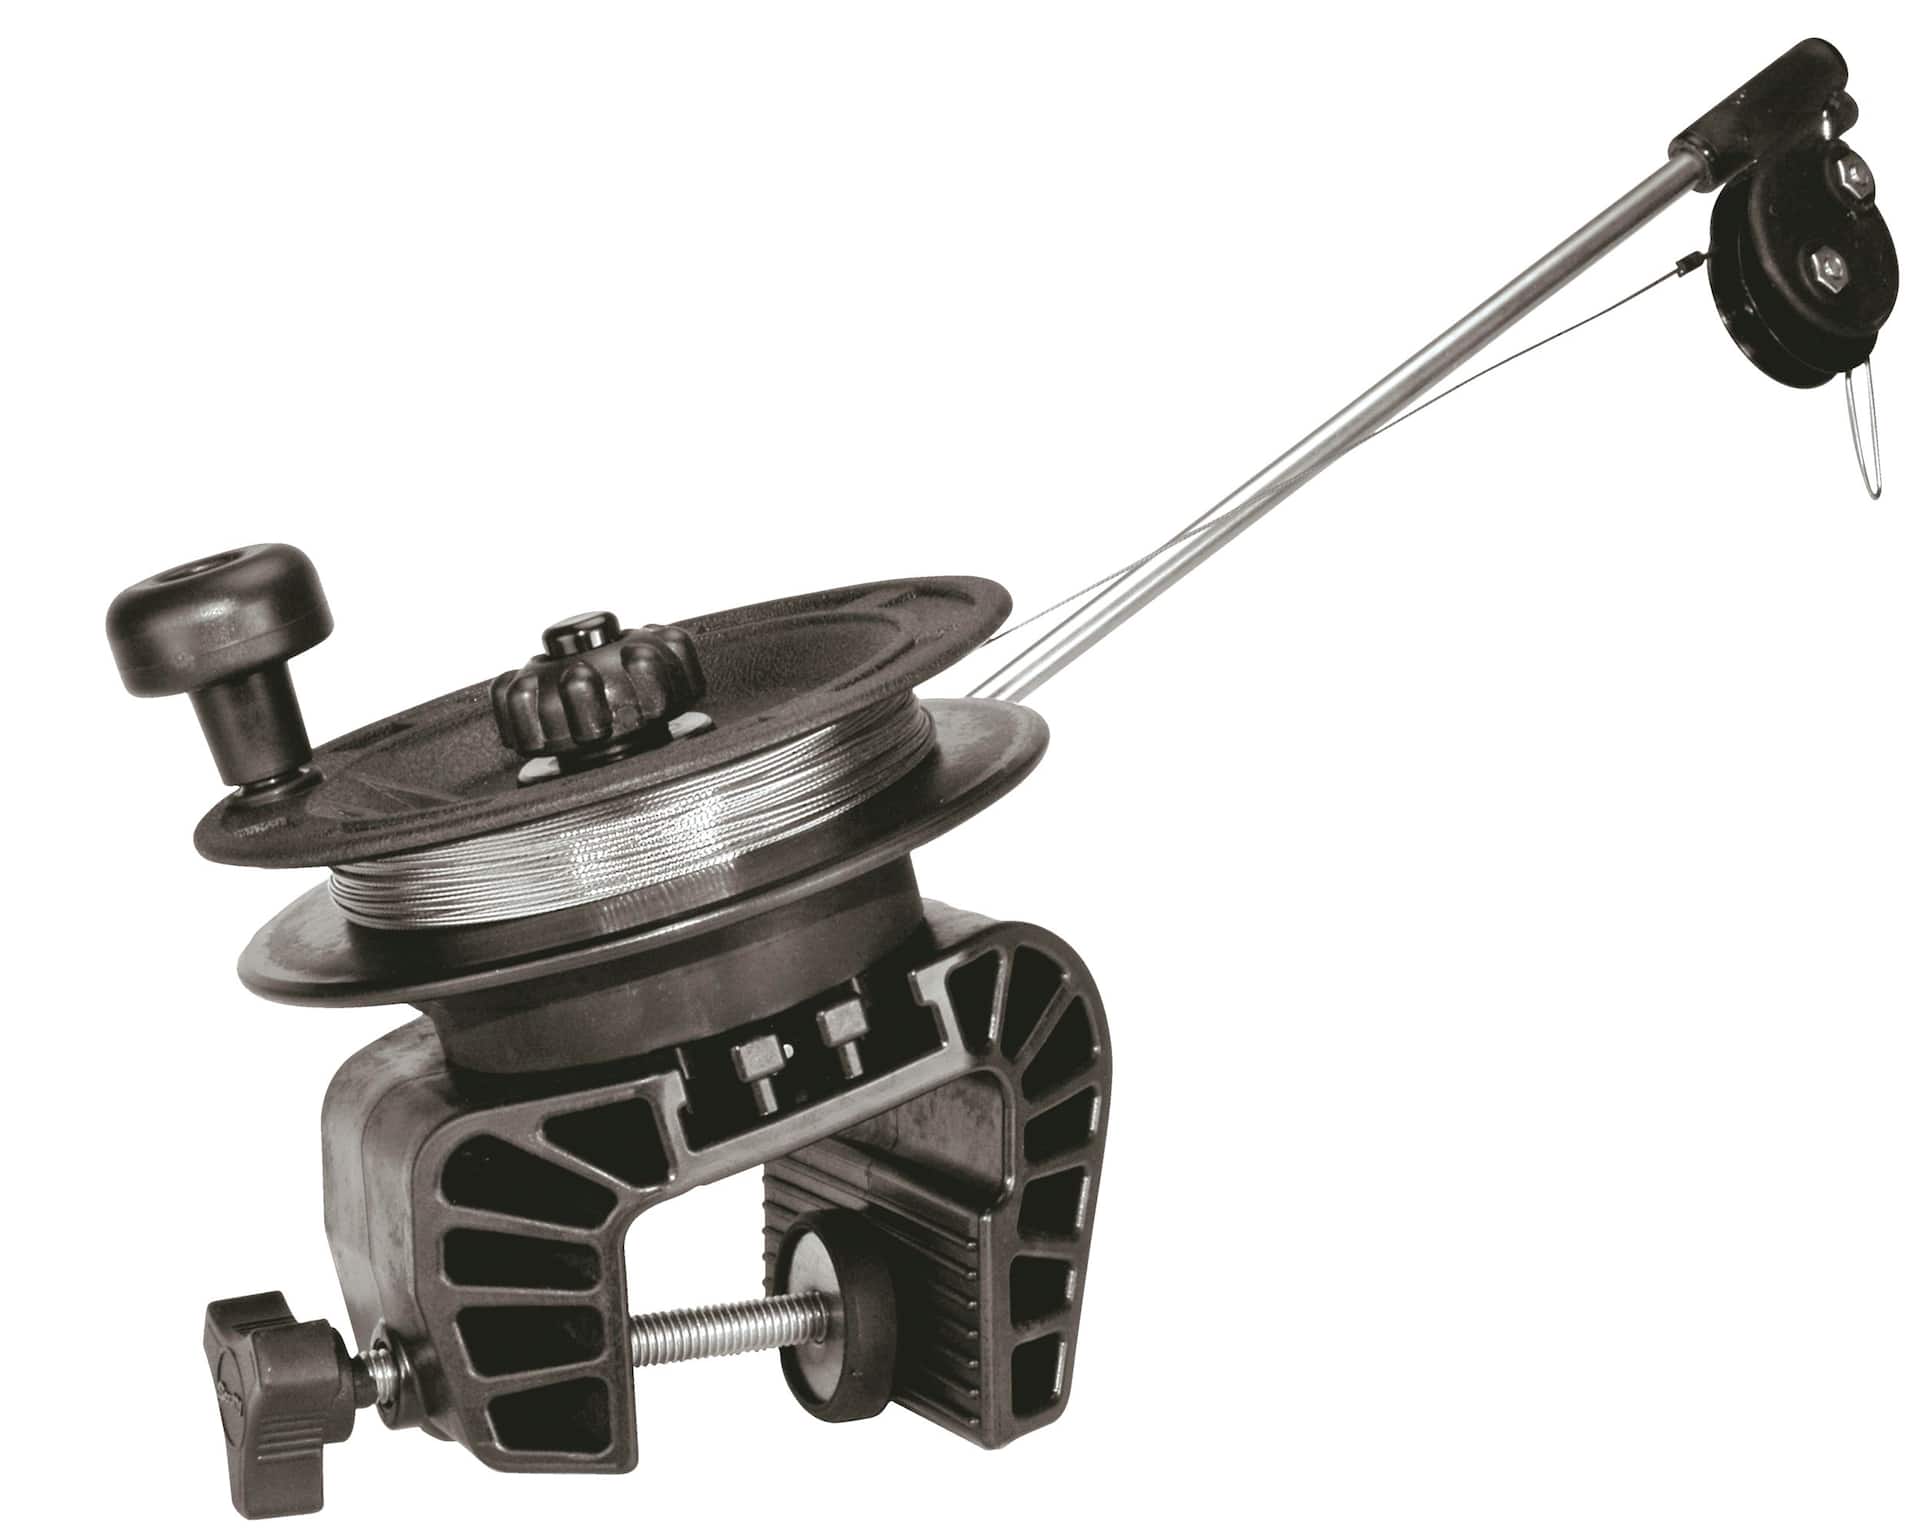 Scotty #1021 Portable Mounting Clamp-on Bracket